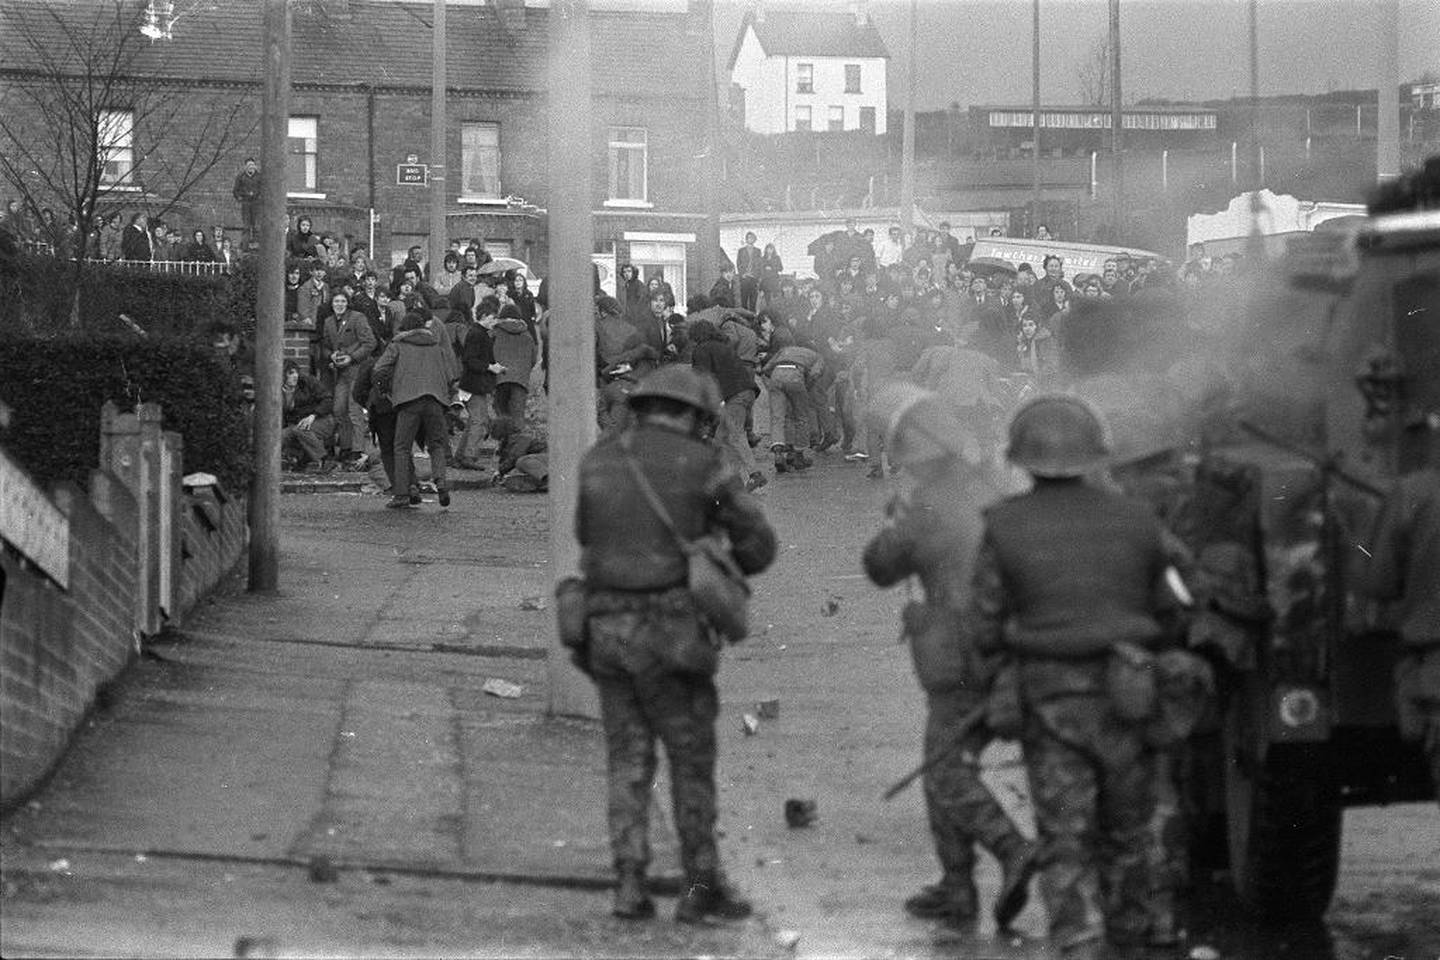 British troops fire rubber bullets at stone-throwing Protestant rioters who had set fire to the mobile classrooms of Our Lady of Mercy Secondary School in the Ballysillian area of west Belfast, Northern Ireland, March 28, 1972. (AP Photo/Michel Lipchitz)